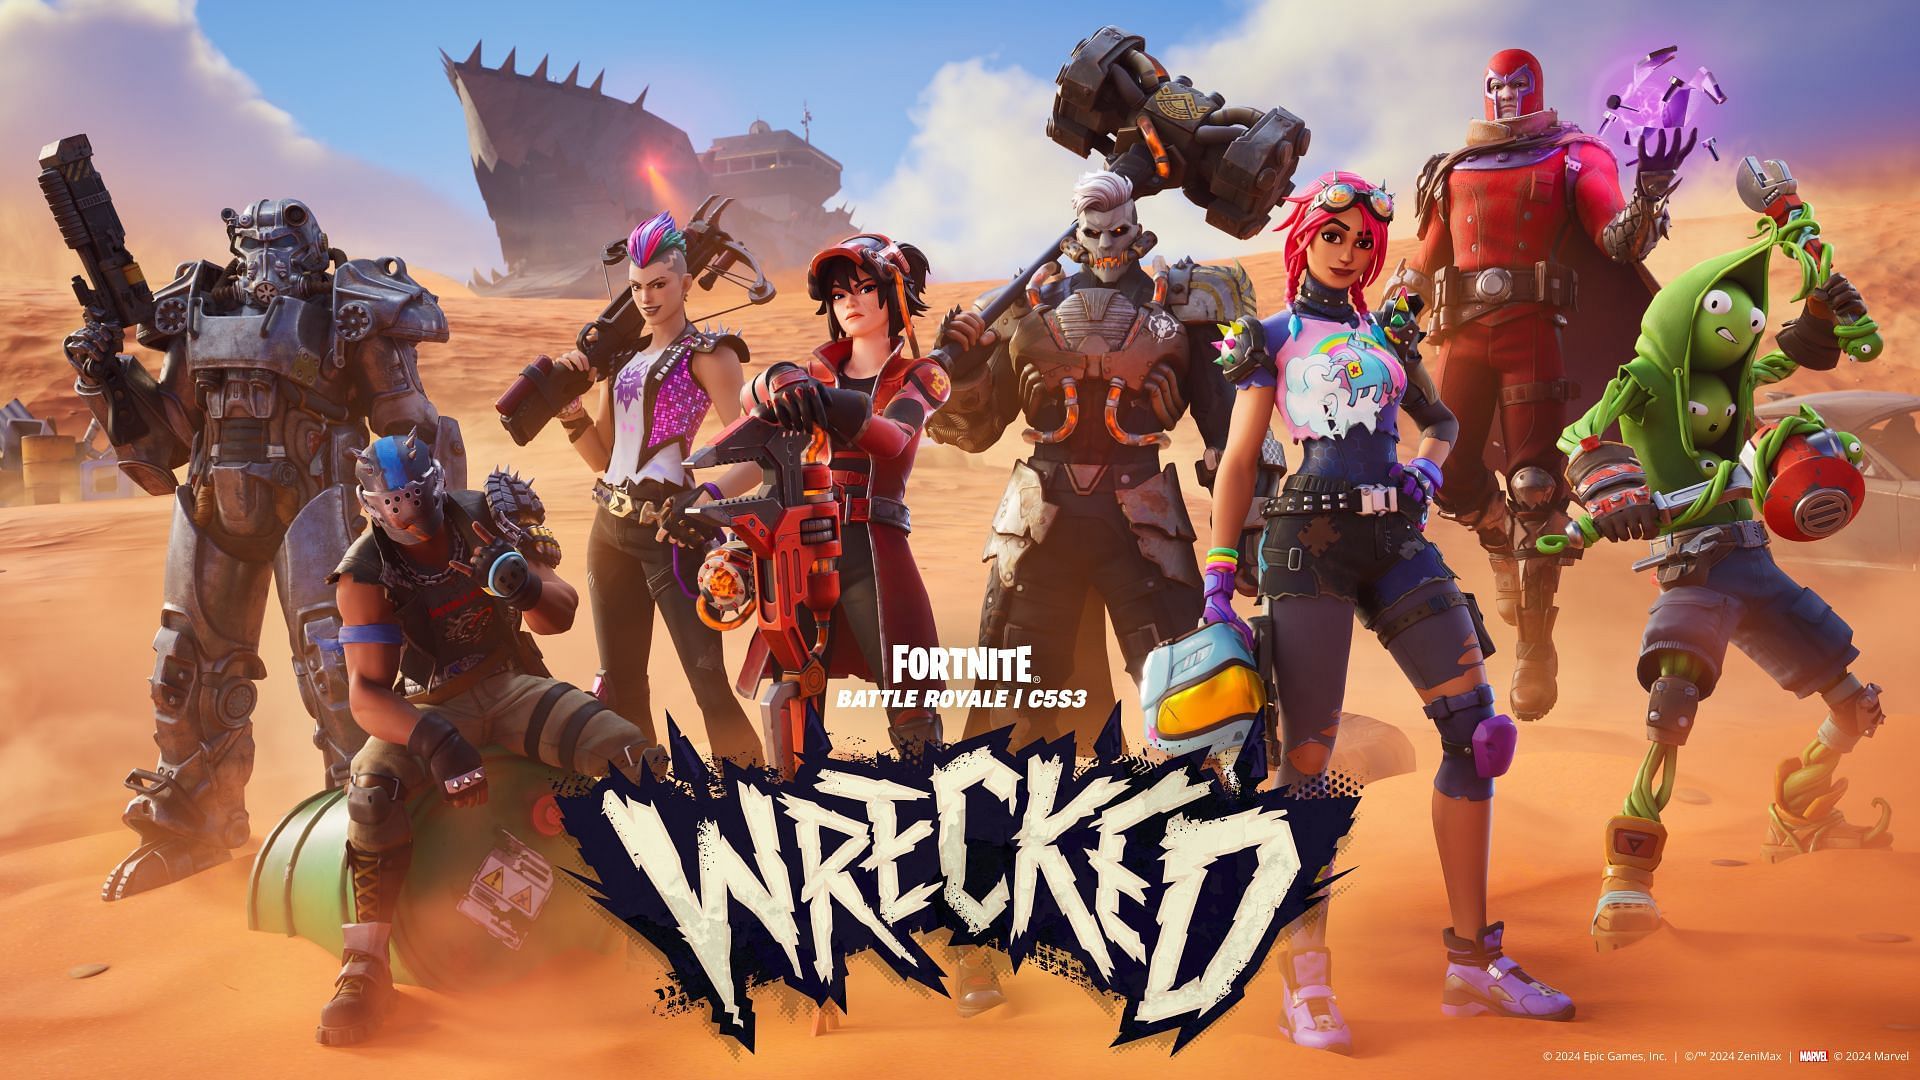 The Wrecked Fortnite Battle Pass (Image via Epic Games)